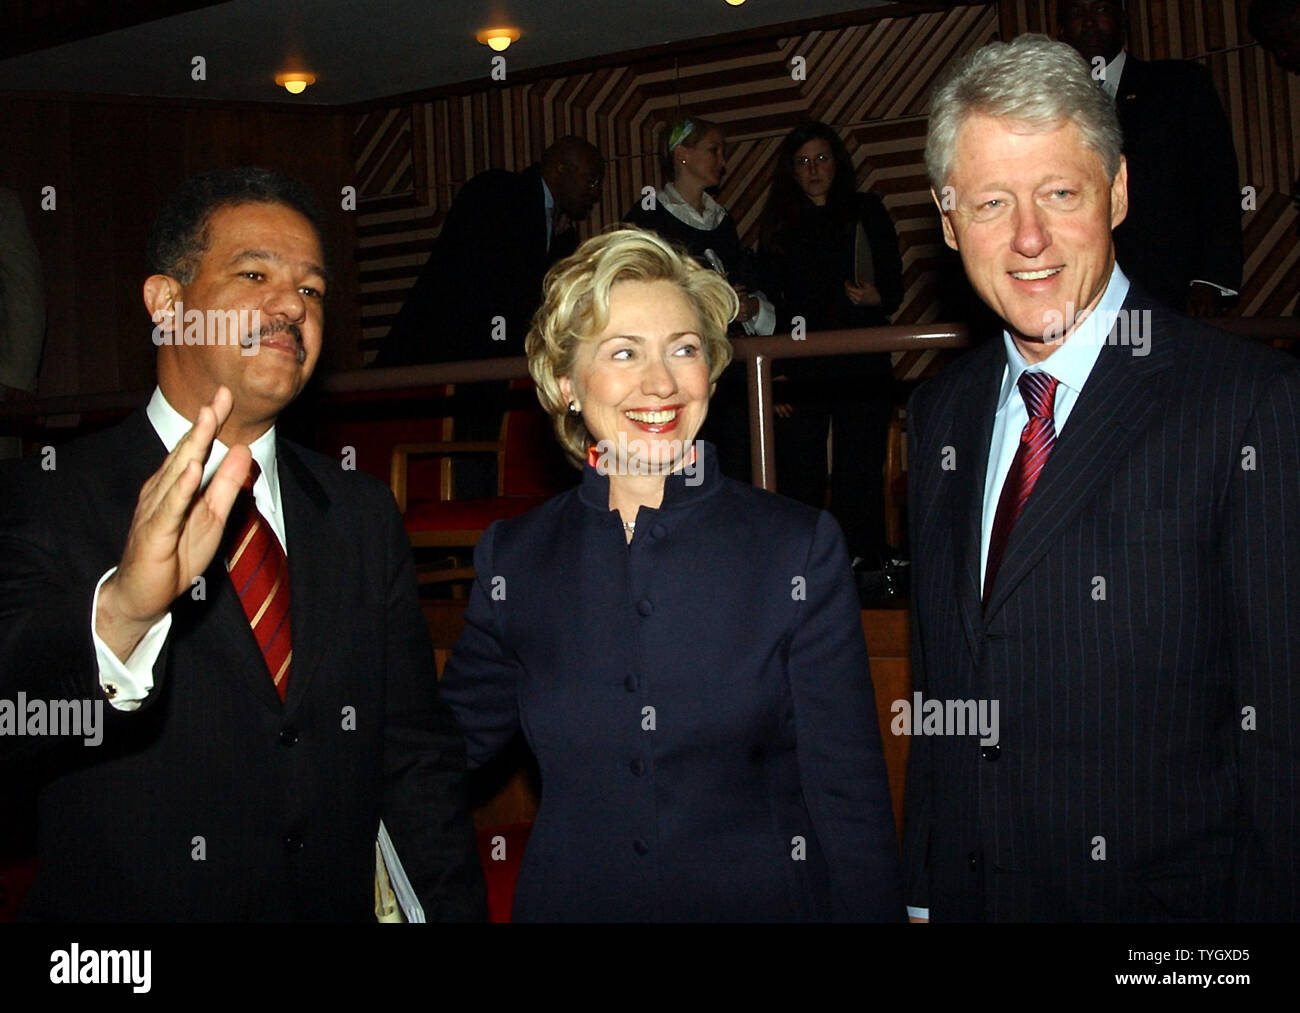 Former U.S. President William Clinton and his wife Senator Hillary Rodham Clinton are joined by President Leonel Fernandez of the Dominican Republic (left) prior to the start of the William Jefferson Clinton Foundation Energy Policy Forum held on 12/6/04 at New York University. (UPI Photo/Ezio Petersen) Stock Photo